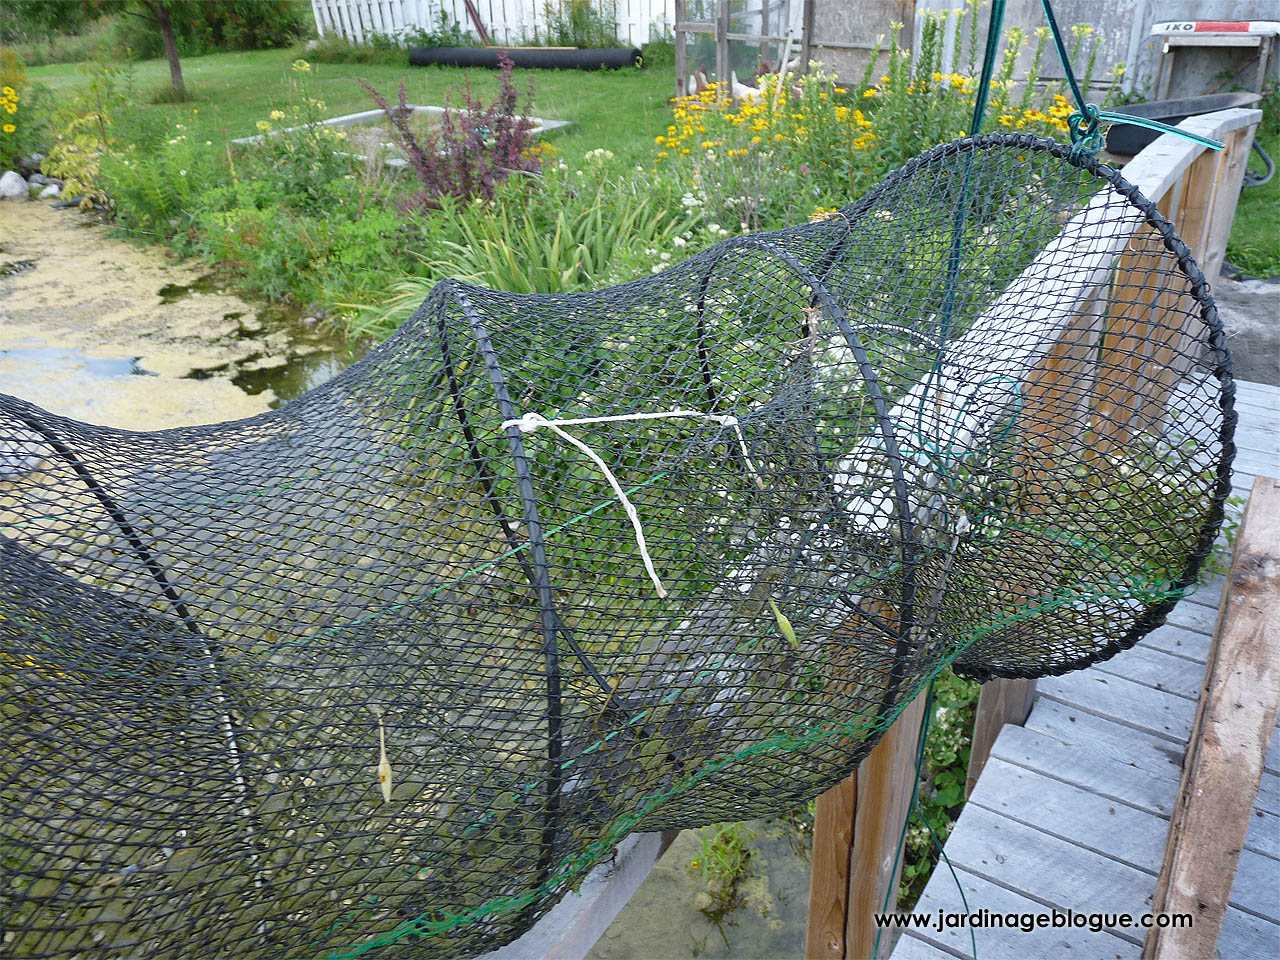 Collapsible Fish Trap for Catching Fish in a Pond